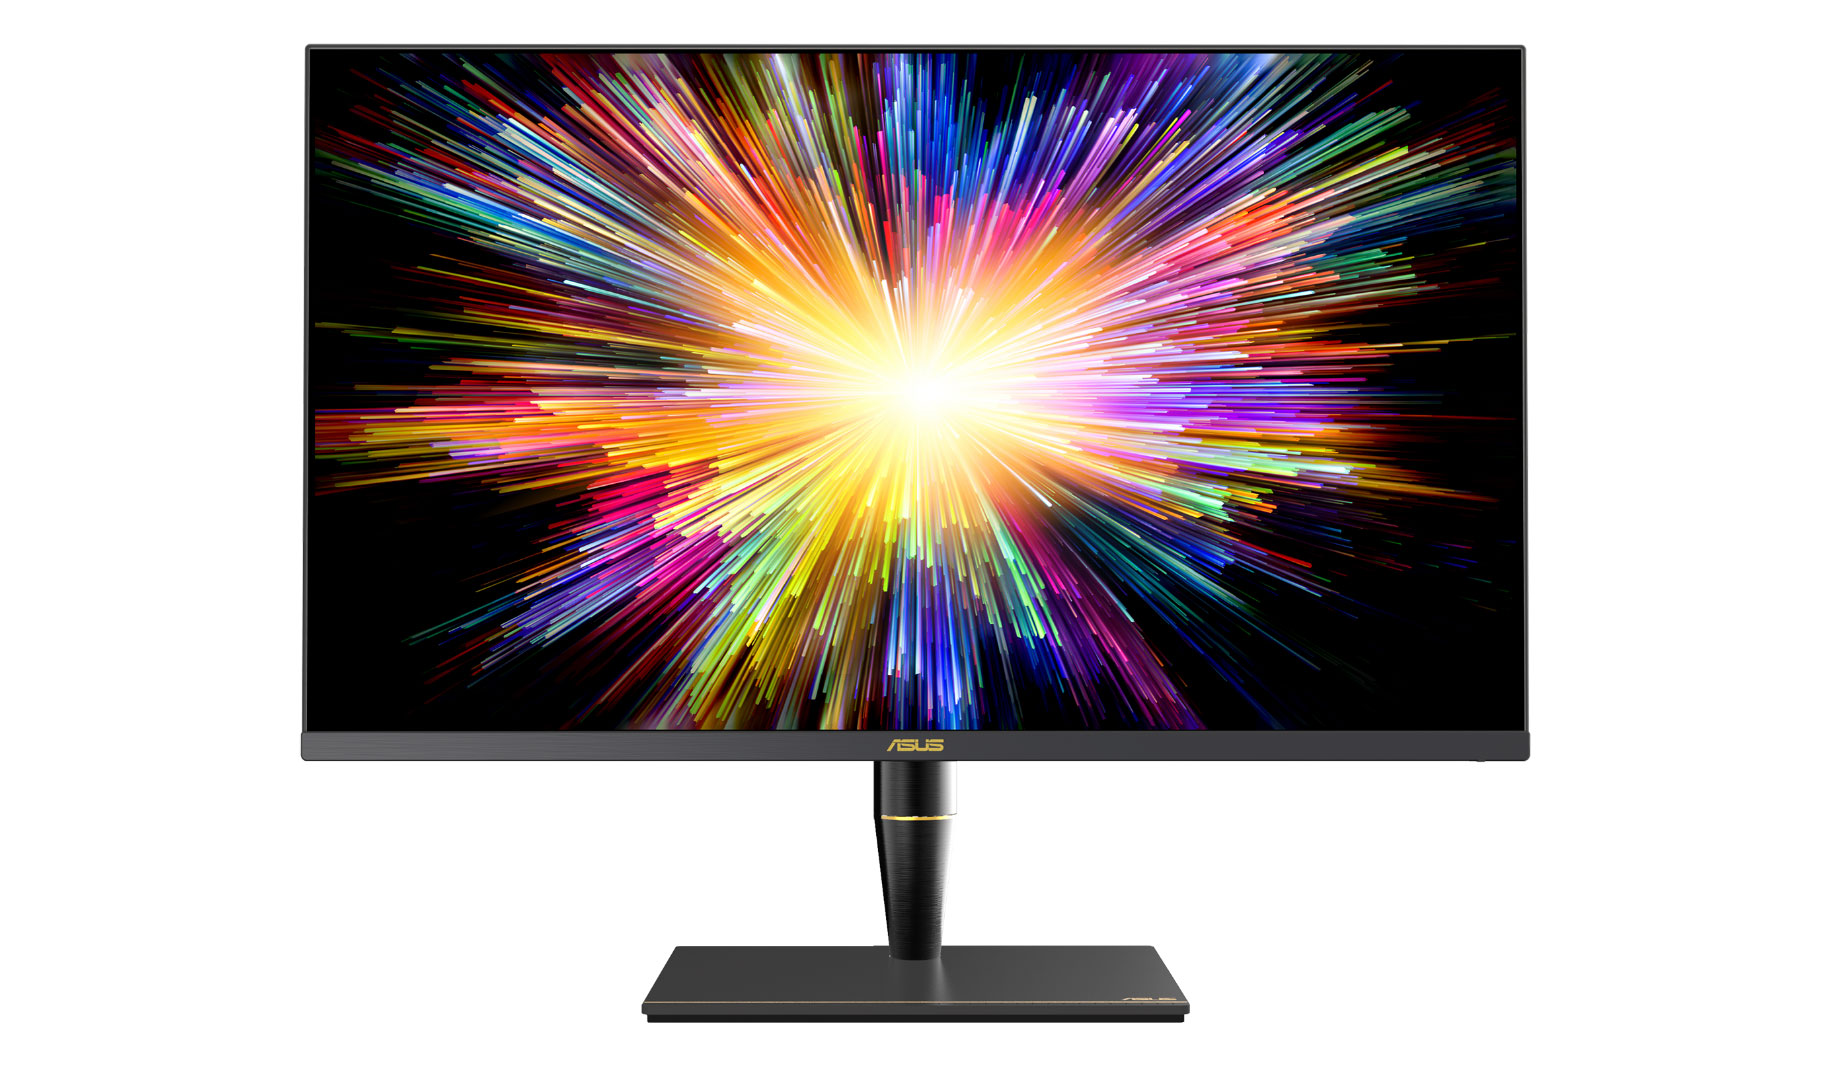 Asus unveils first PC LCD monitor with miniLED backlight - FlatpanelsHD